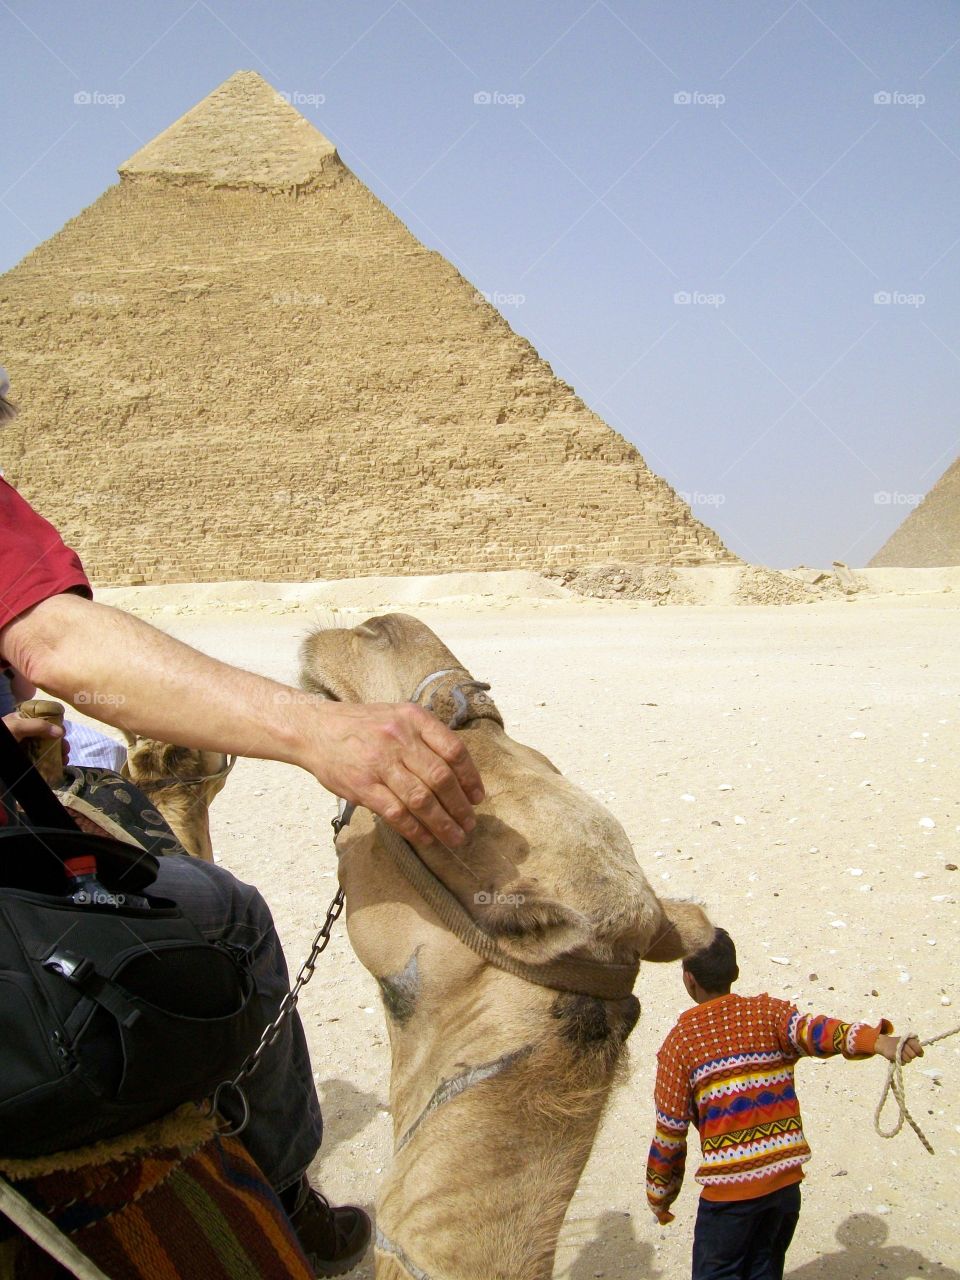 Travel companion petting a curious camel on the way up to the Giza pyramids 